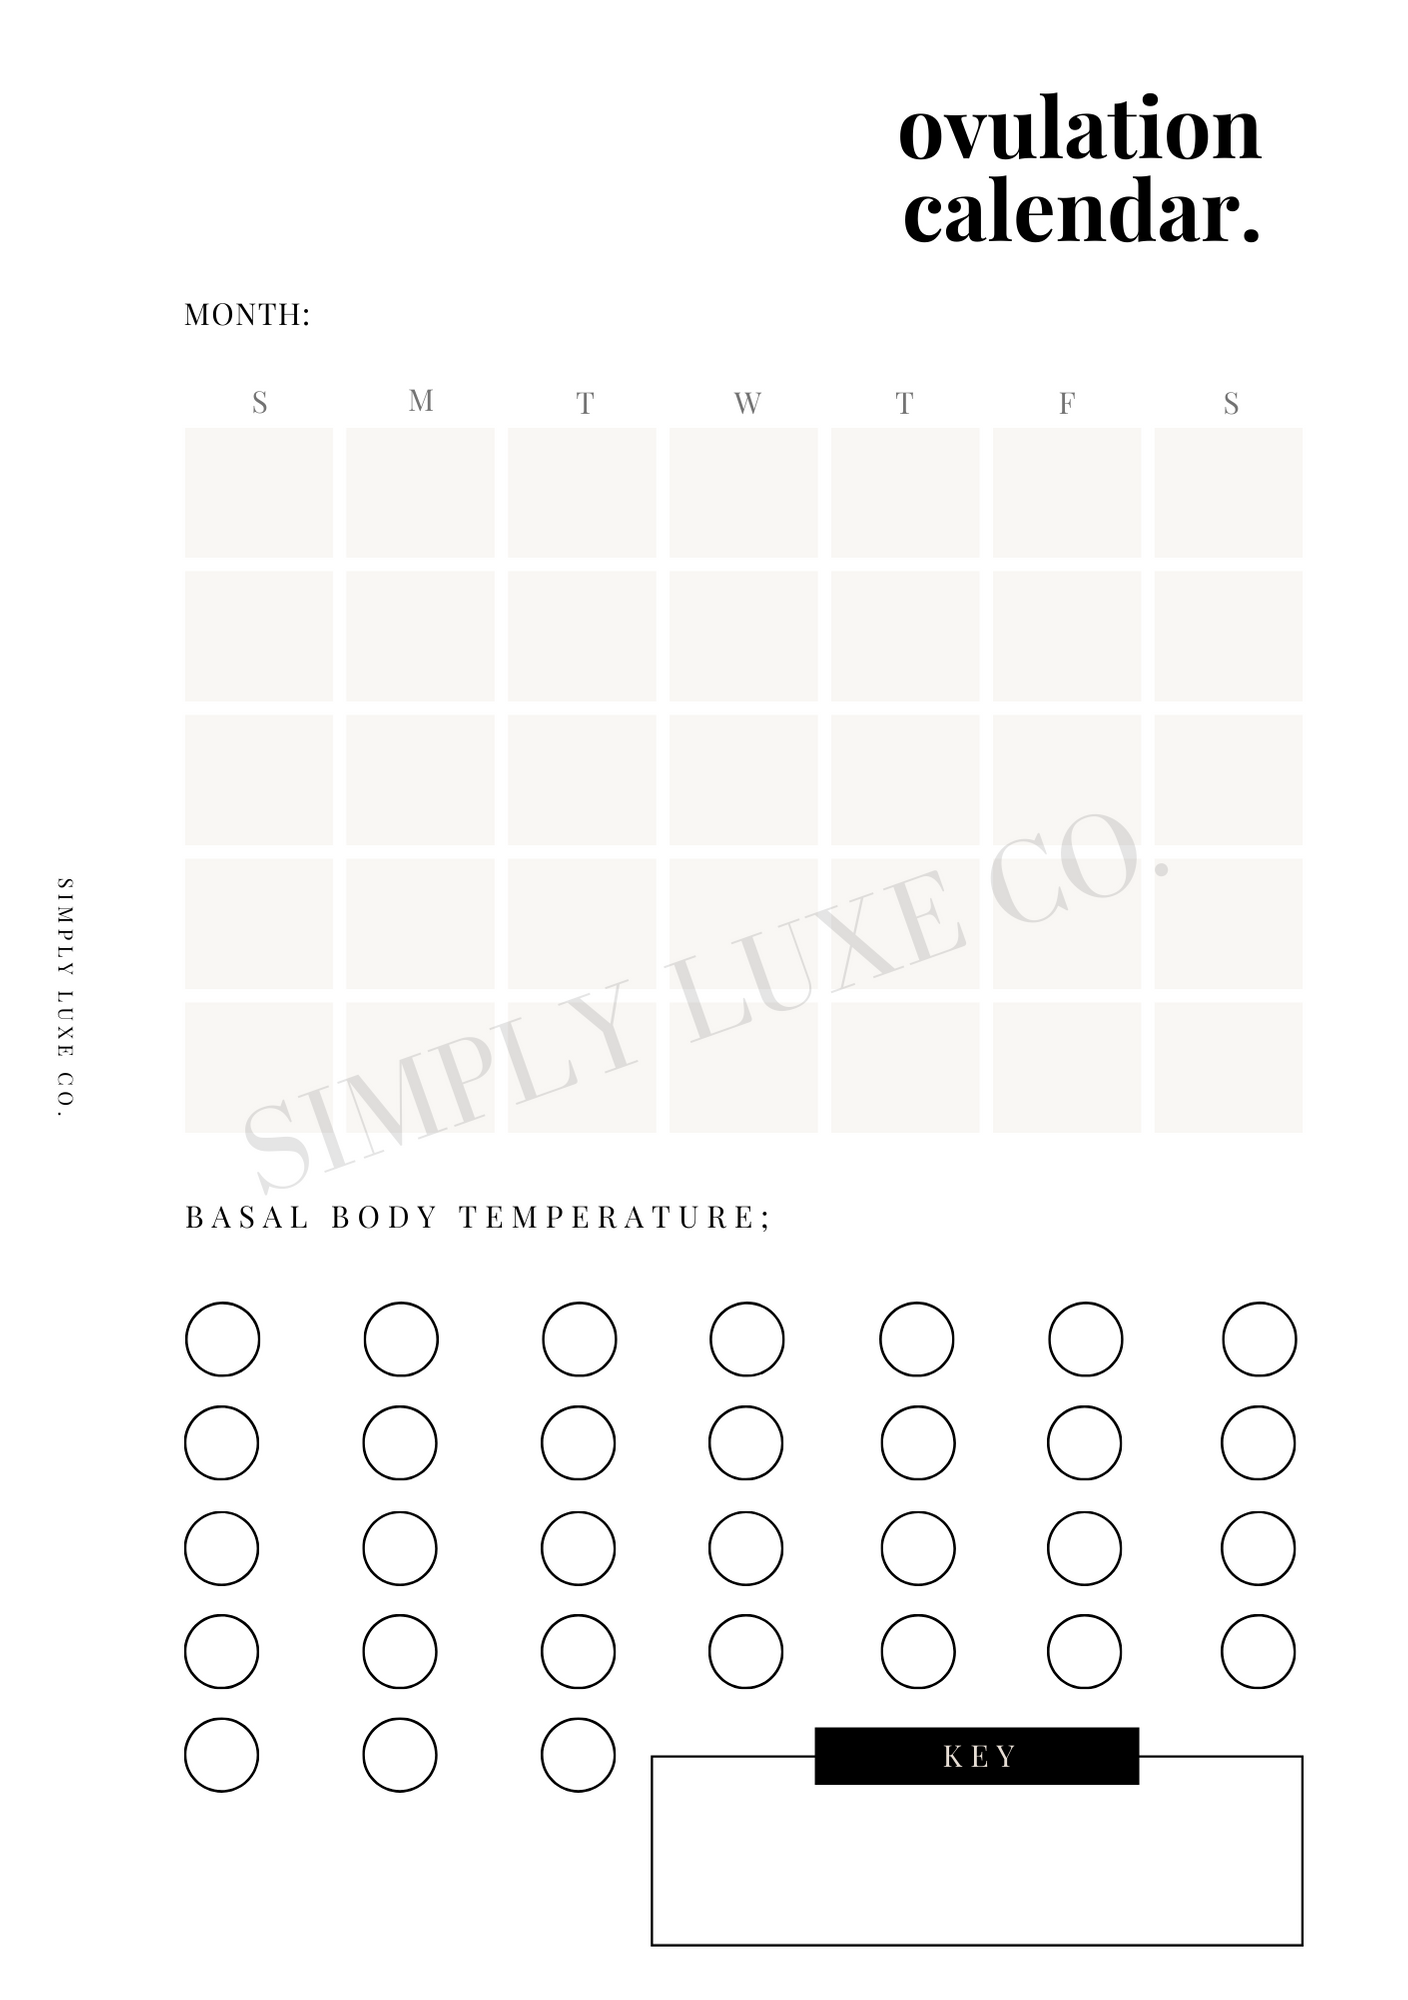 Ovulation Calendar Printable Inserts - Available in 2 colors